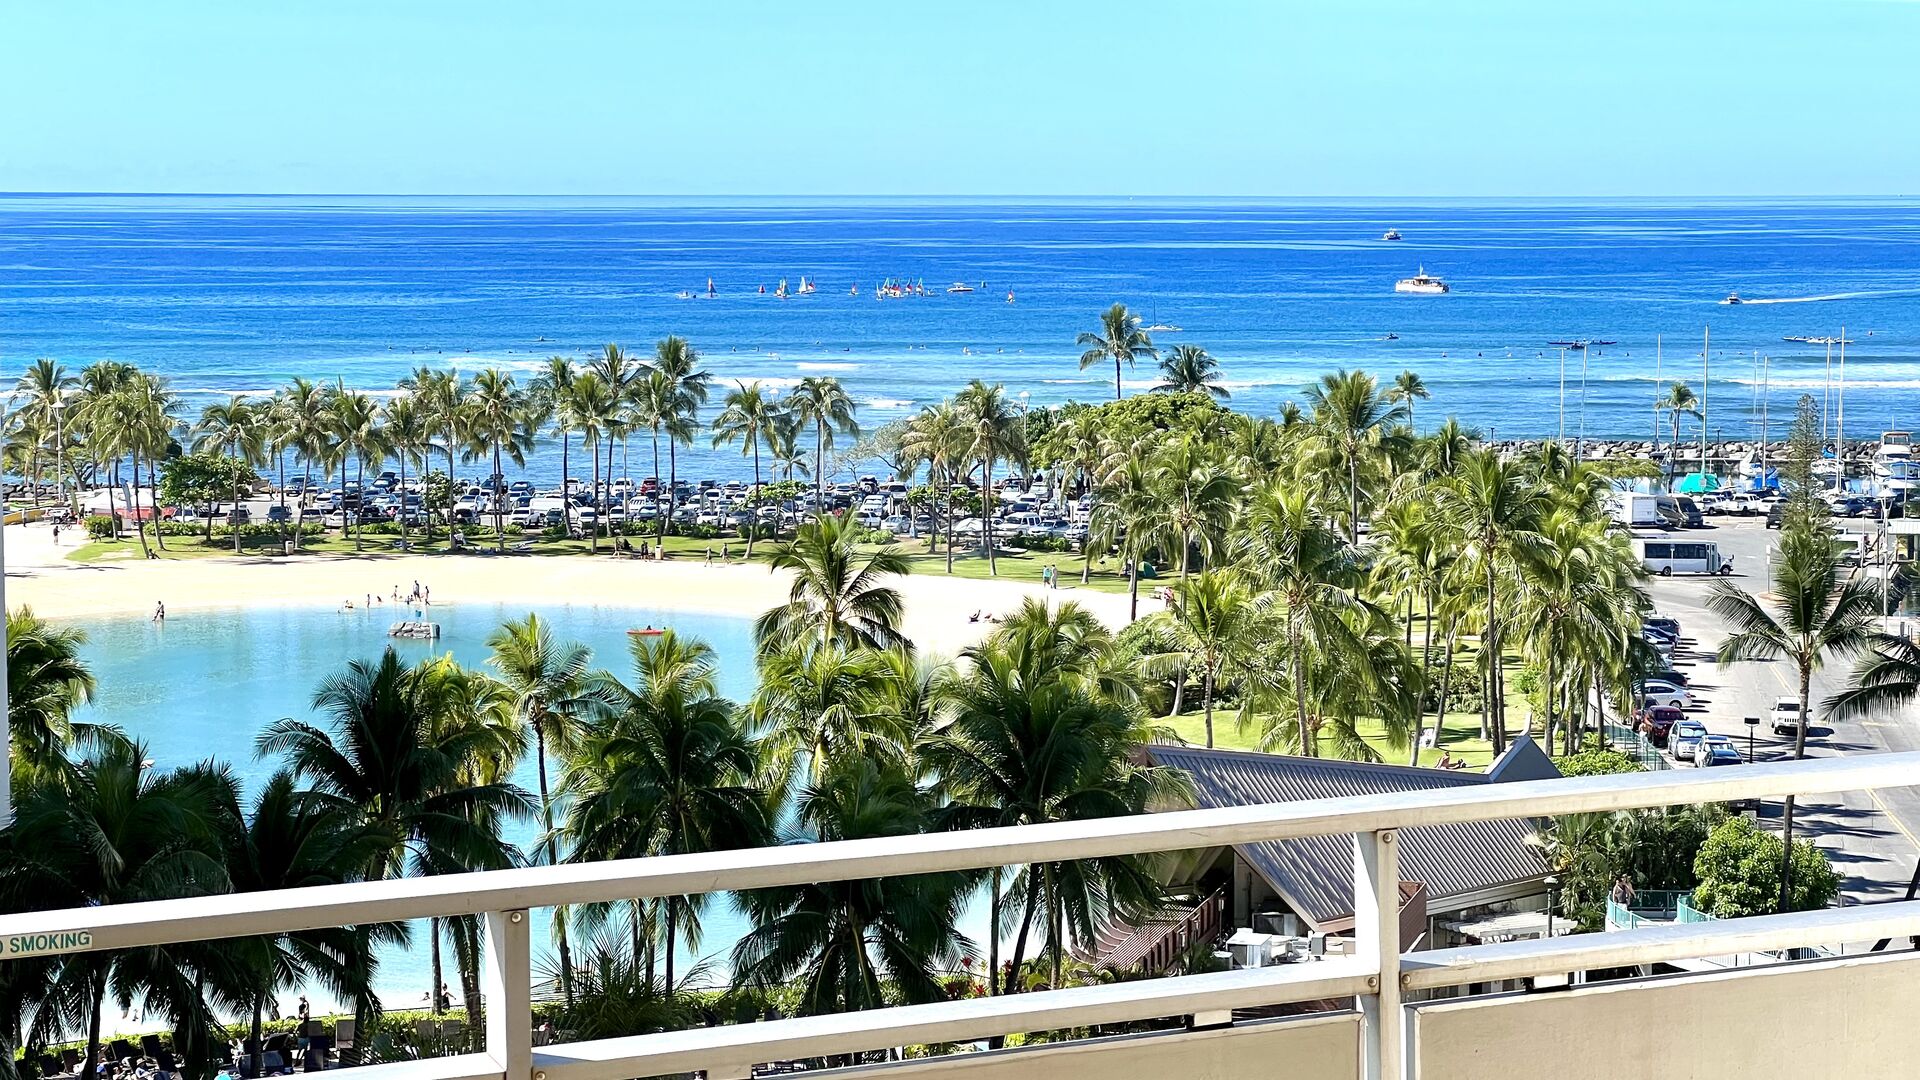 Beautiful lagoon and ocean view from your private lanai balcony.